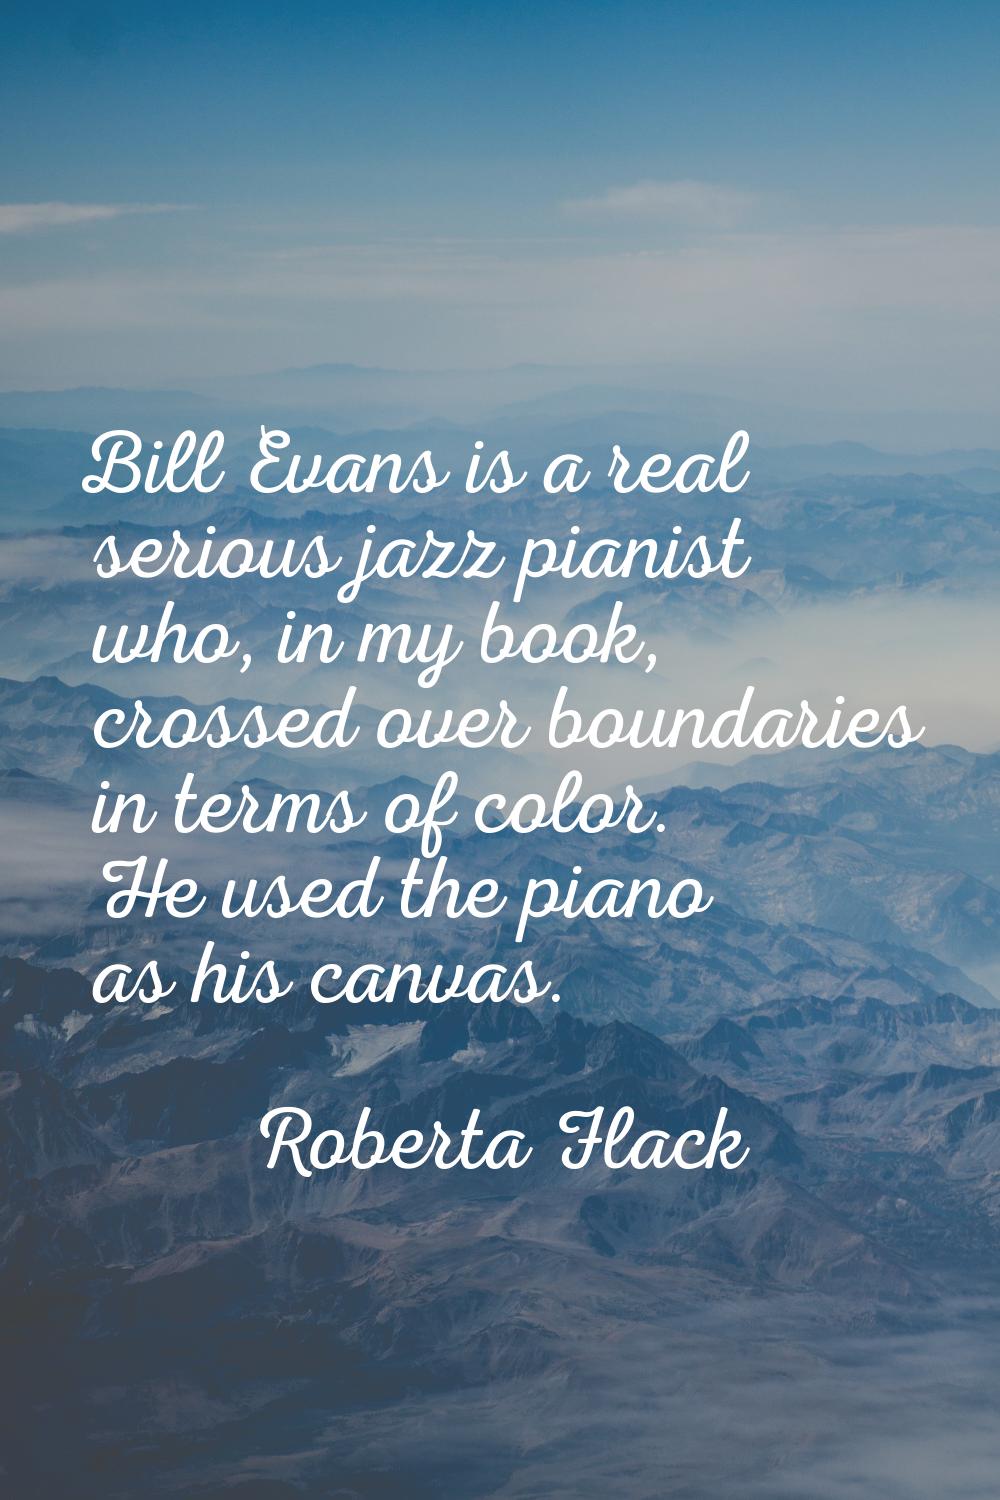 Bill Evans is a real serious jazz pianist who, in my book, crossed over boundaries in terms of colo